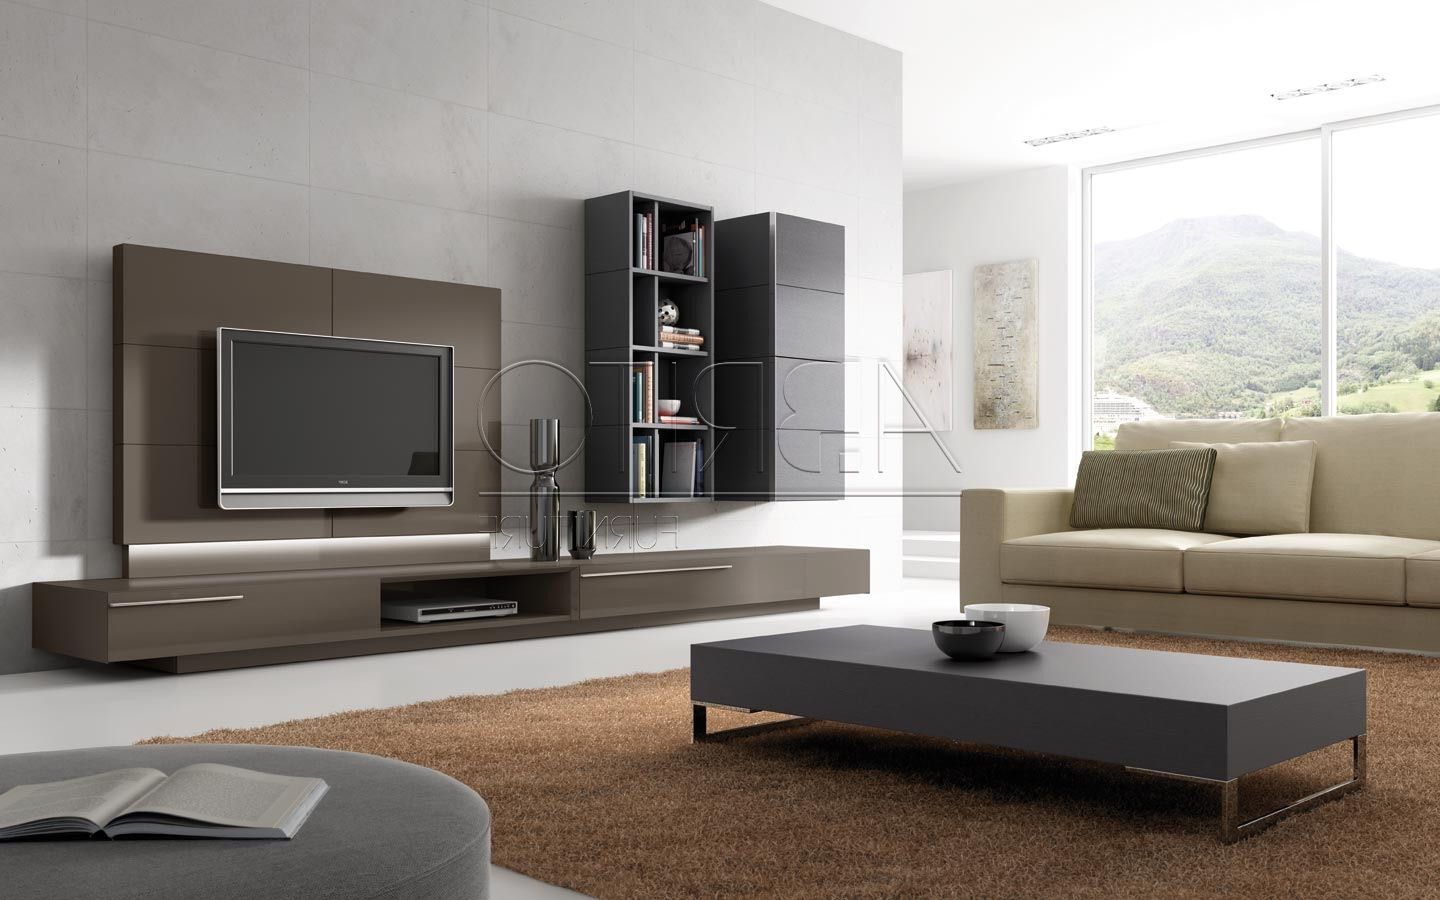 Contemporary Wall Units For Living Room – Wall Units Design Ideas Throughout 2017 Tv Wall Units (View 9 of 15)